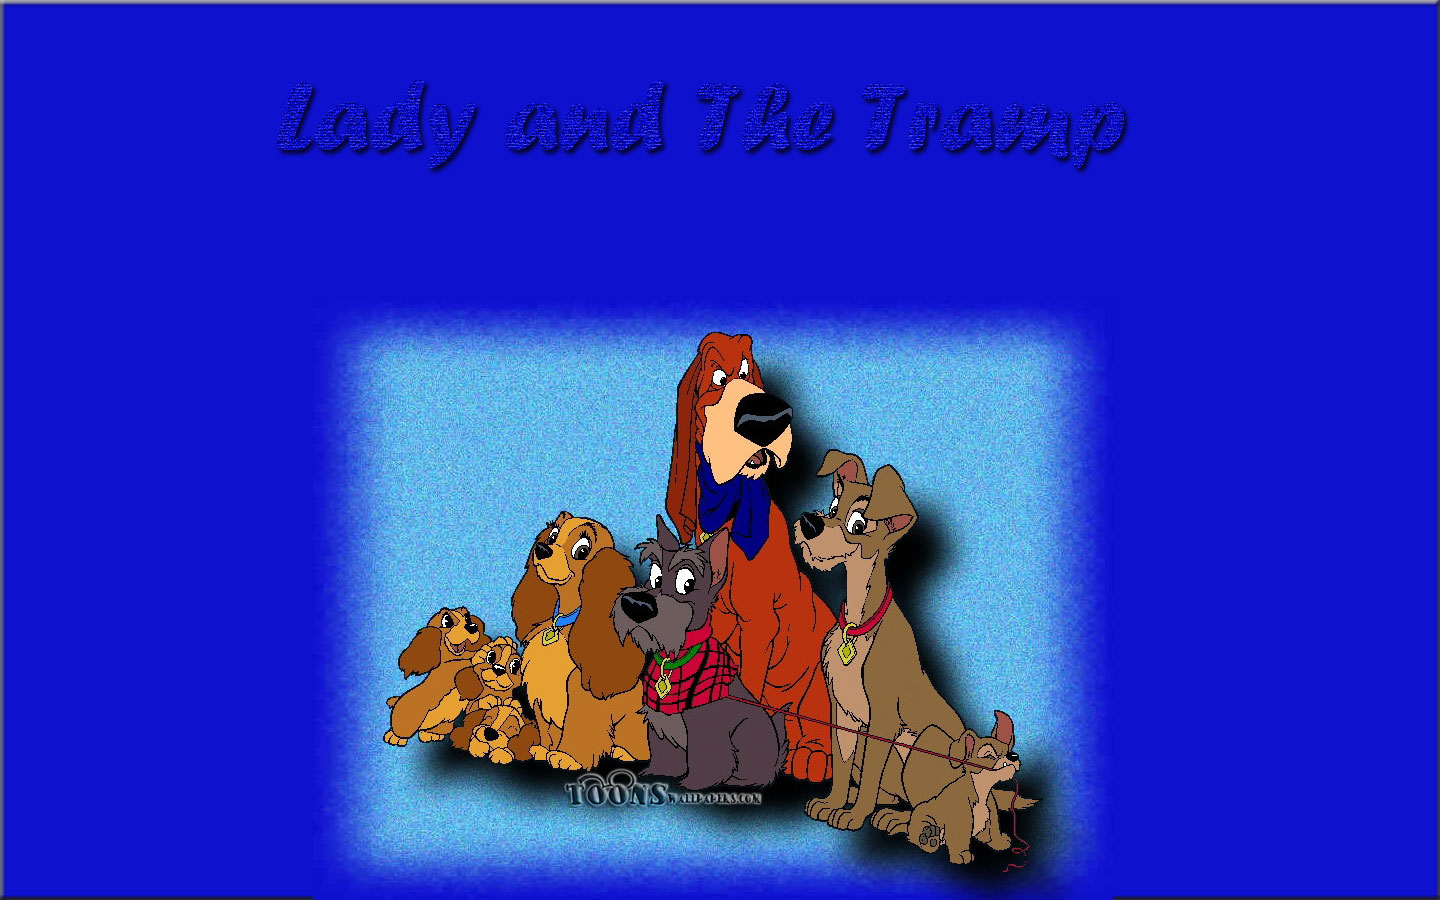 movie, lady and the tramp (1955), annette (lady and the tramp), collette (lady and the tramp), danielle (lady and the tramp), jock (lady and the tramp), lady (lady and the tramp), lady and the tramp, scamp (lady and the tramp), tramp (lady and the tramp), trusty (lady and the tramp)